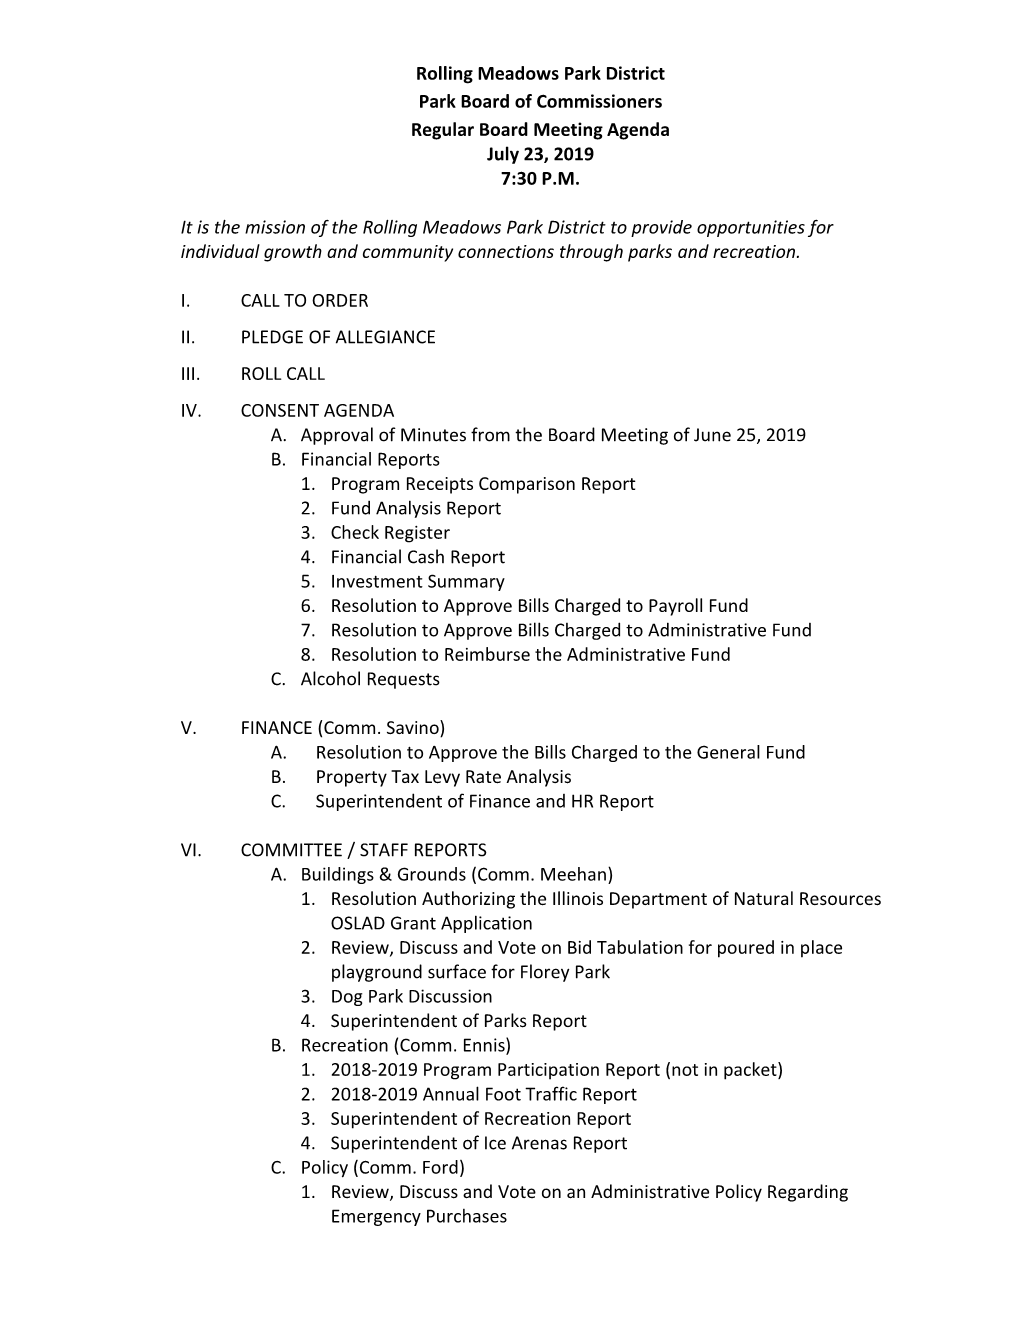 Rolling Meadows Park District Park Board of Commissioners Regular Board Meeting Agenda July 23, 2019 7:30 P.M